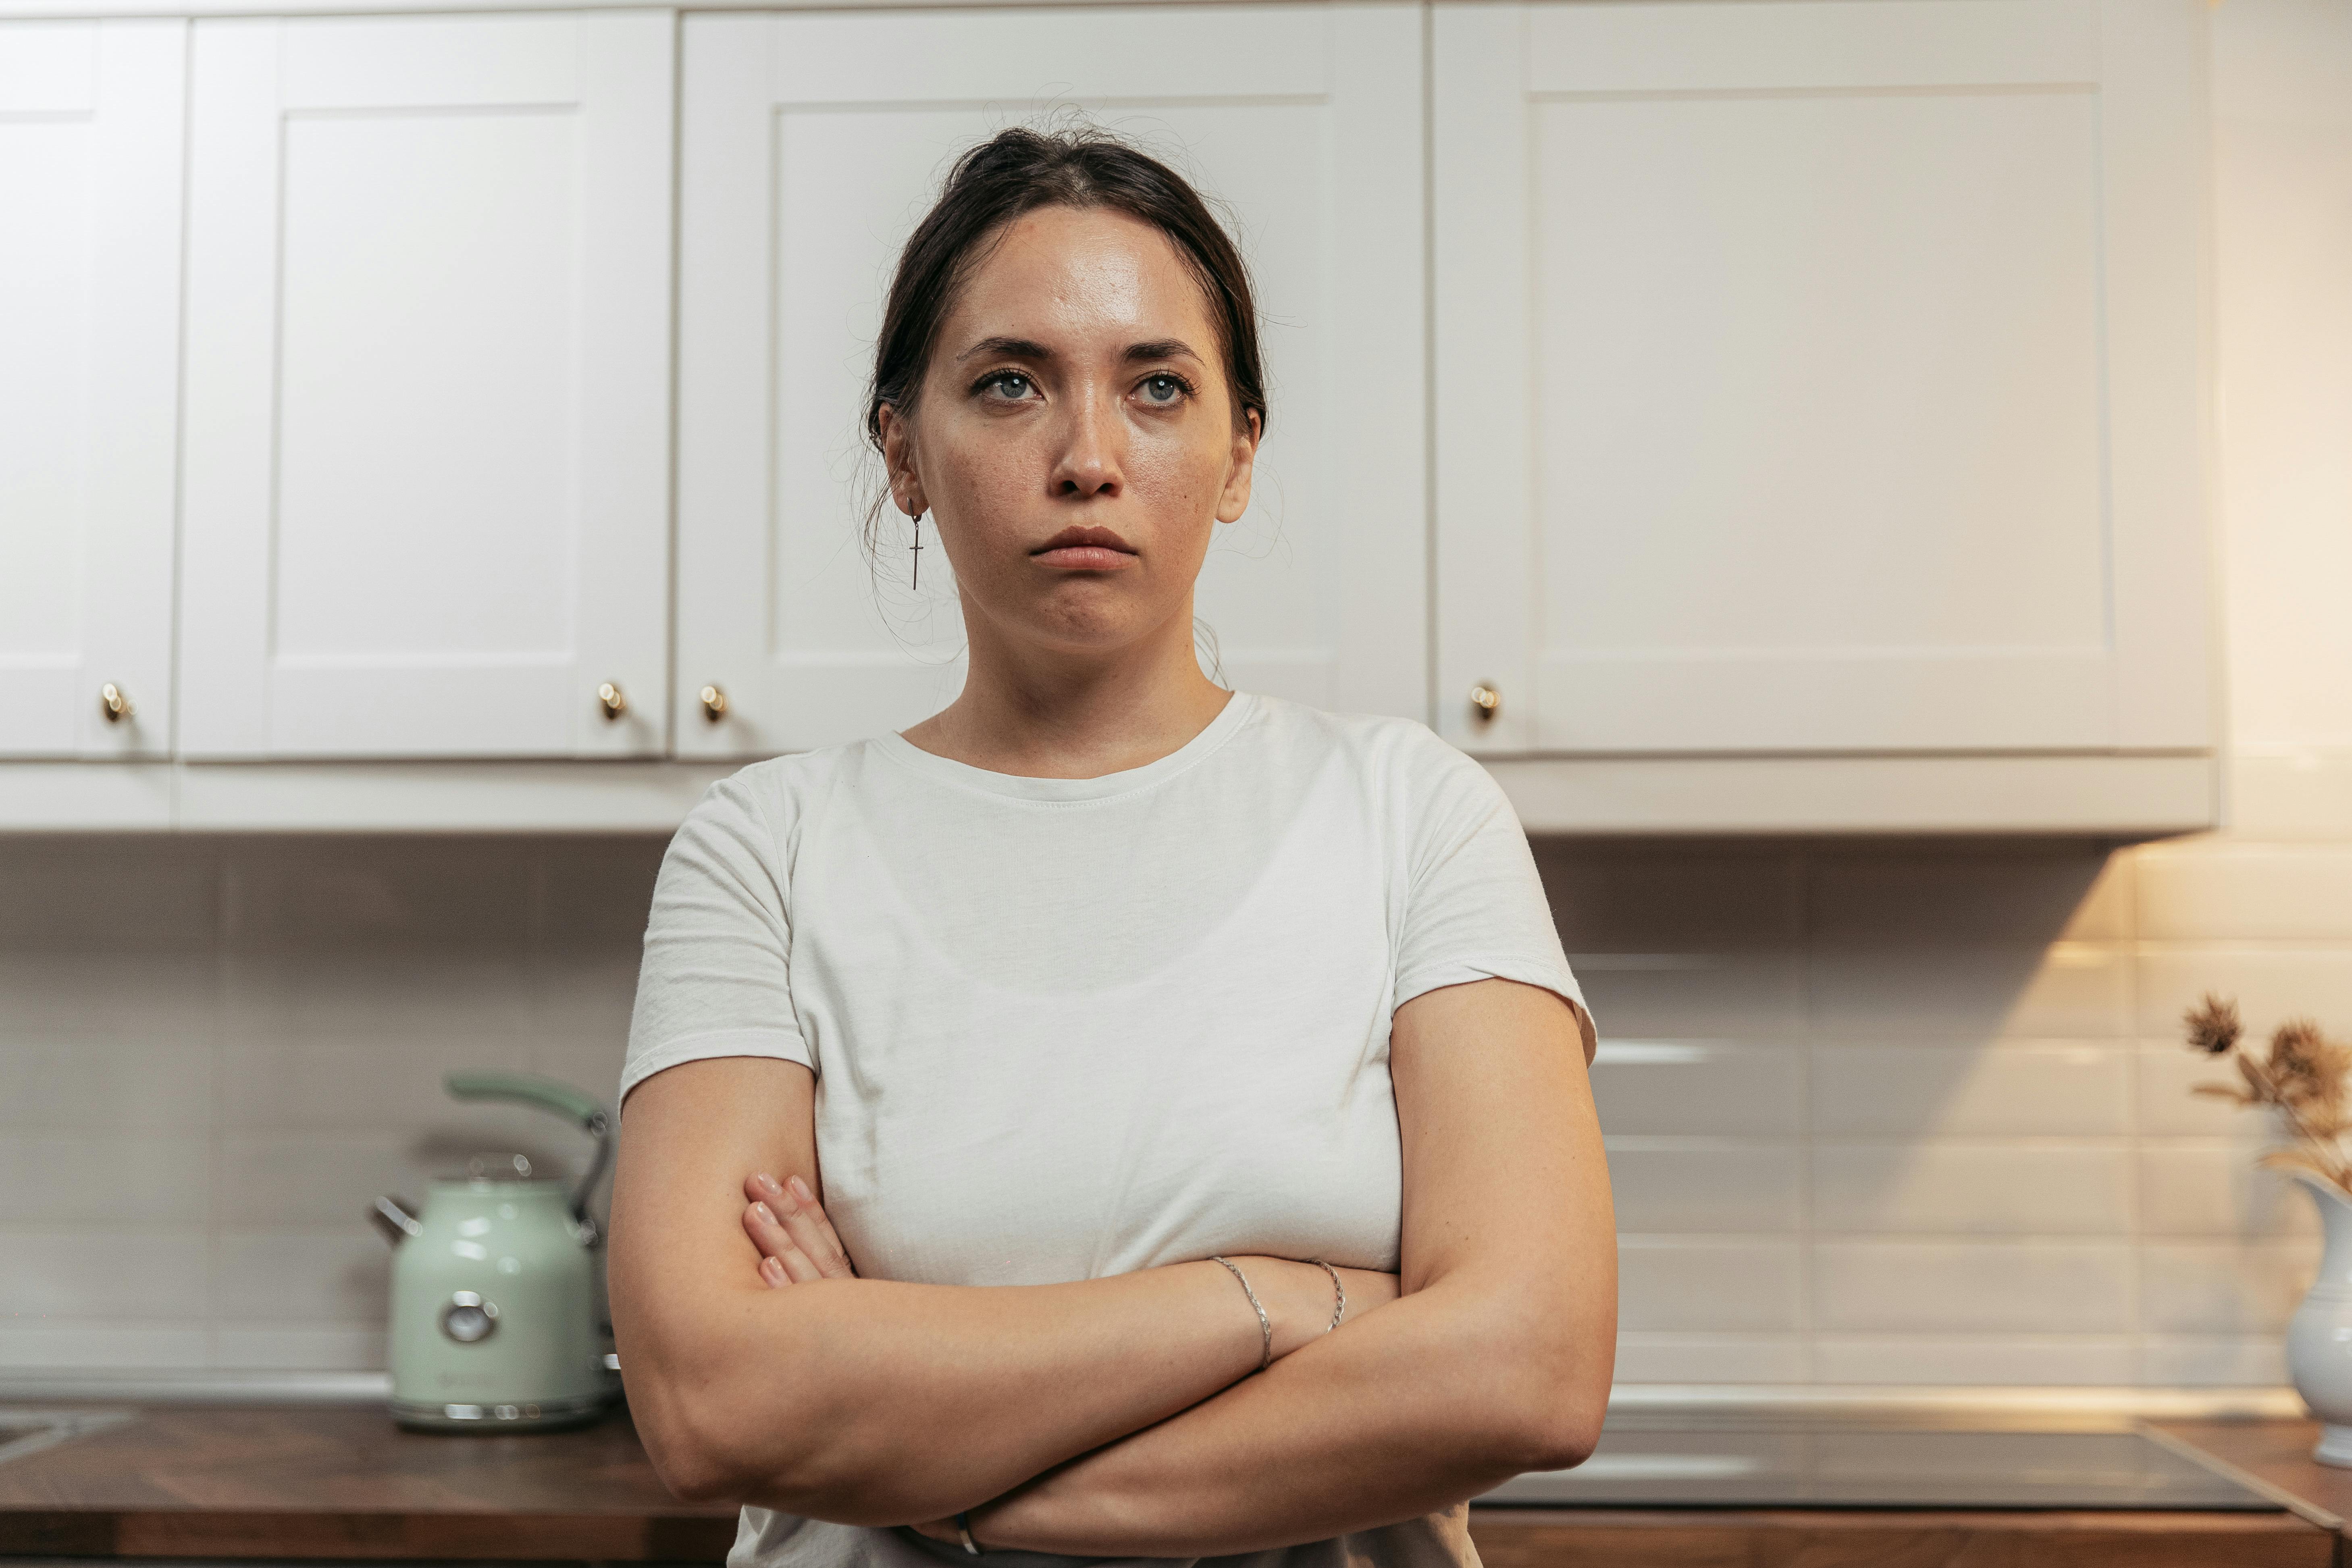 A woman standing in the kitchen feeling upset | Source: Pexels